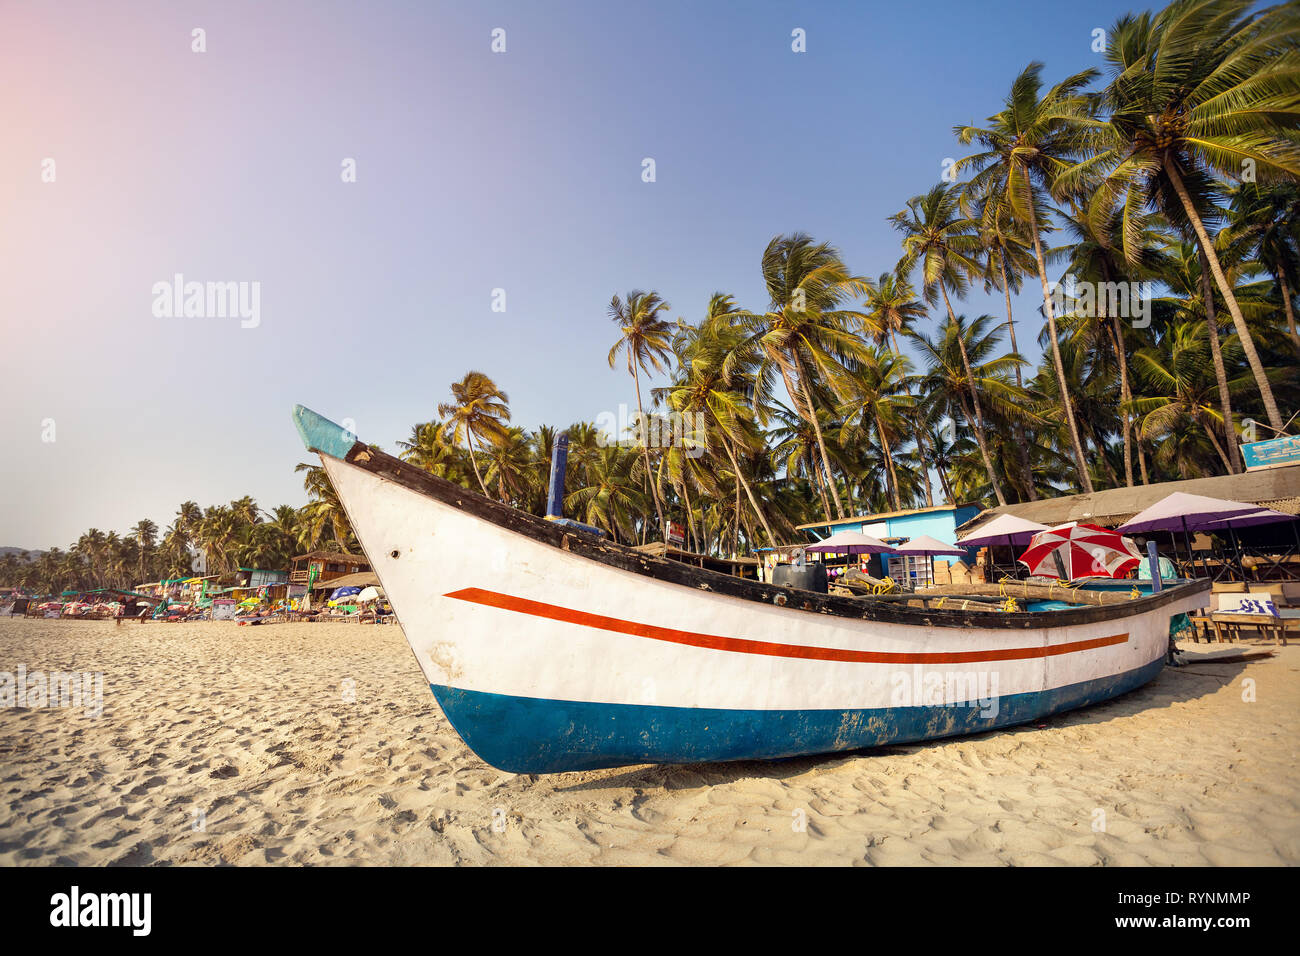 Fisherman boat on the beach at sunset at Palolem beach in Goa, India Stock Photo